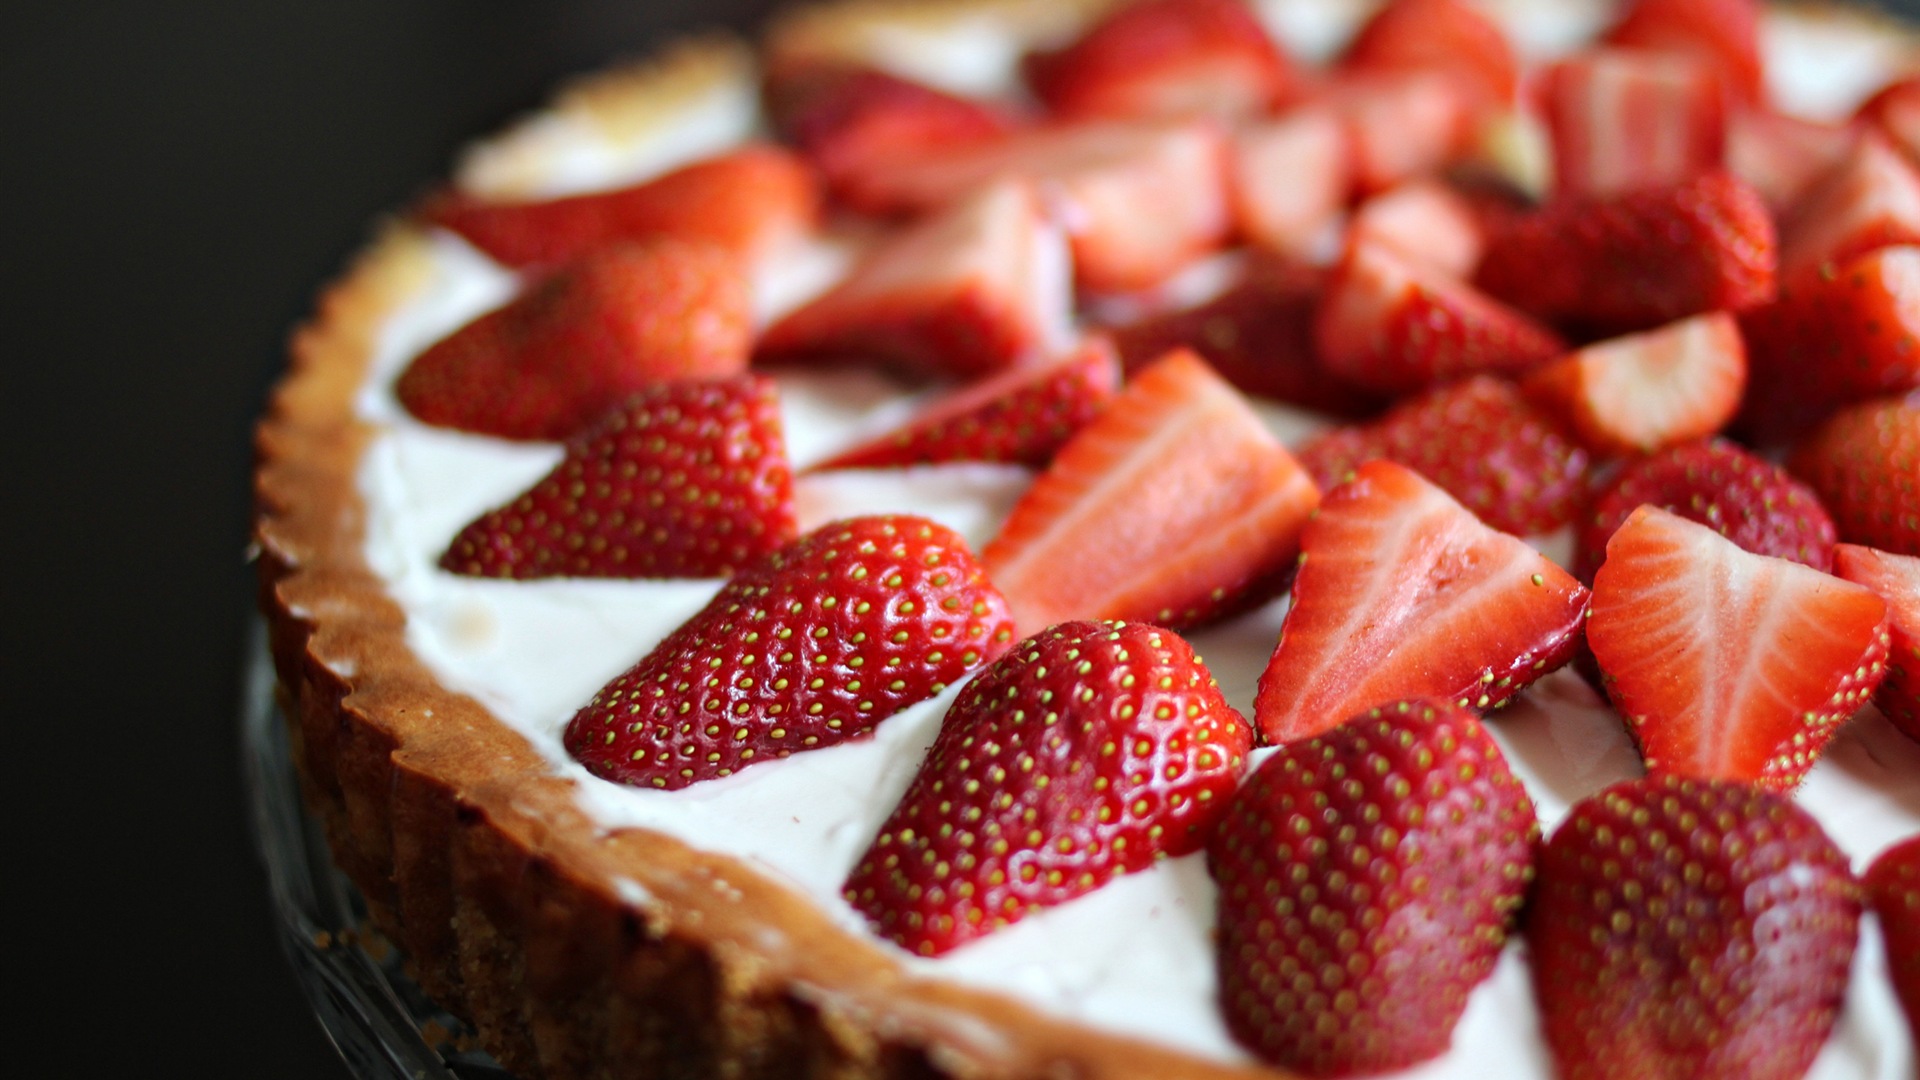 Delicious strawberry cake HD wallpapers #4 - 1920x1080